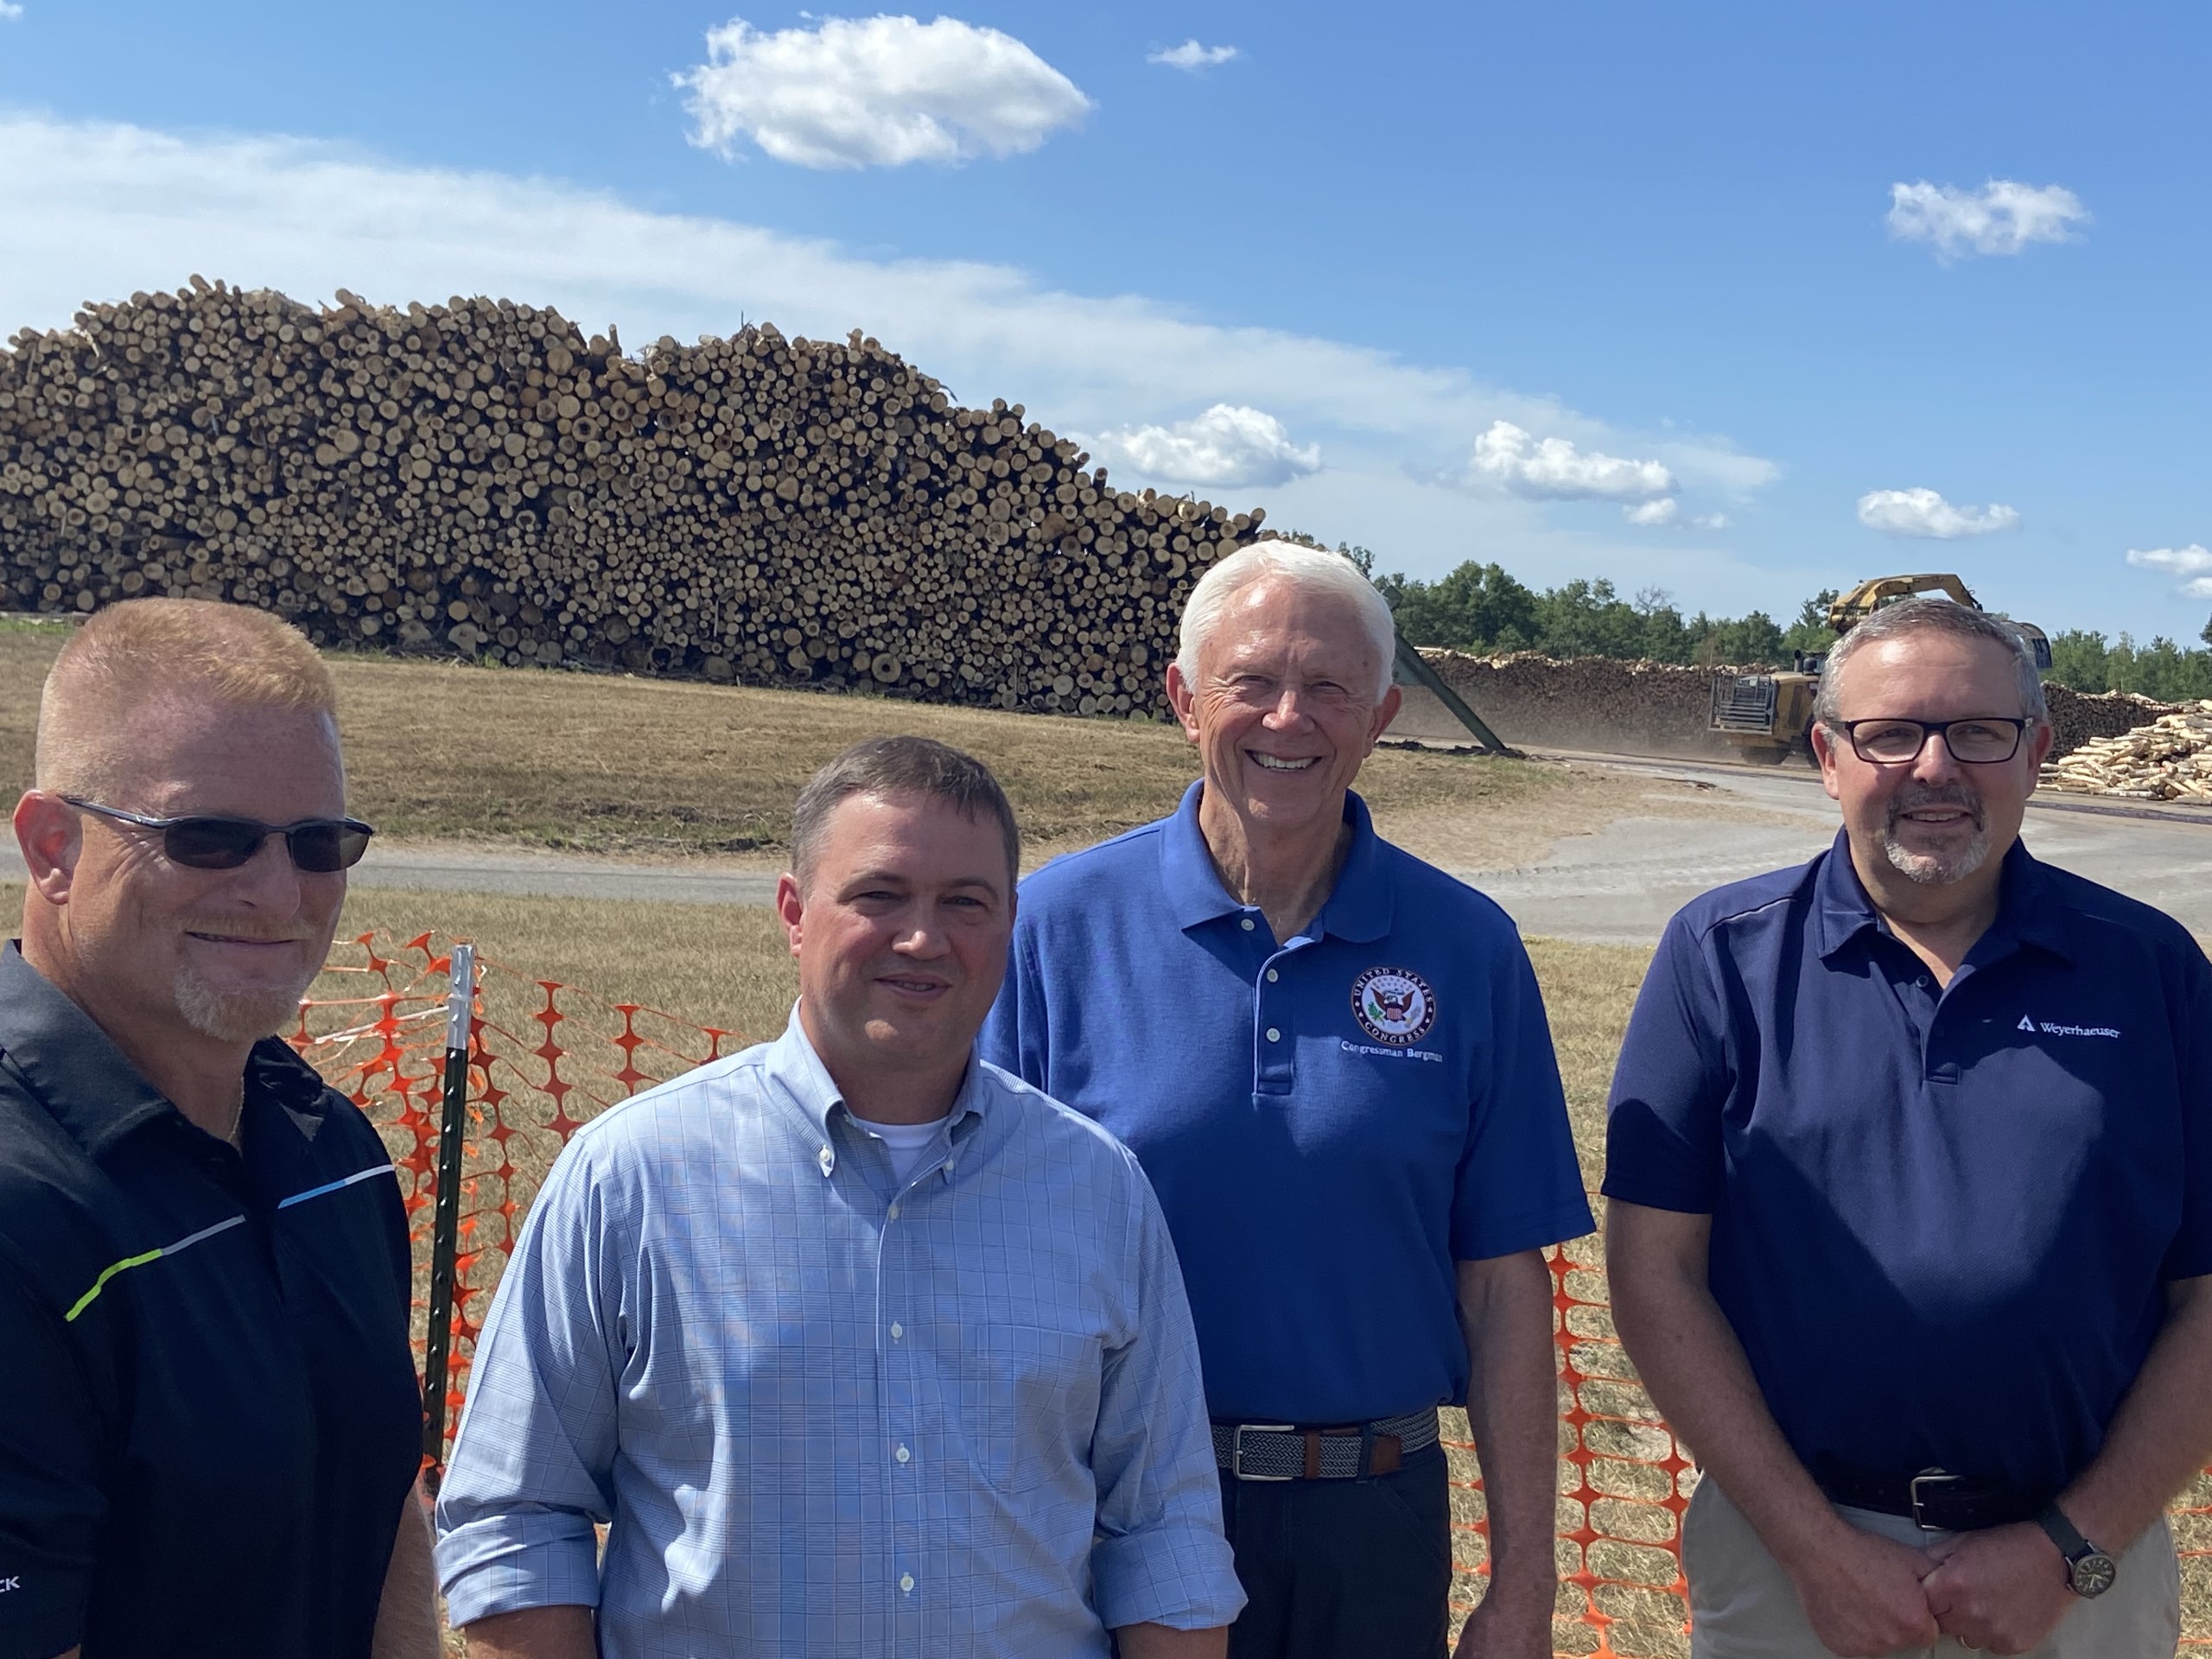 Steve Cutlip (panels manufacturing director), Ryan Beaver (vice president of Panels), Michigan Congressman Jack Bergman, Bruce Milligan (Grayling mill manager) in front of the Grayling woodyard during the 40th anniversary celebration.